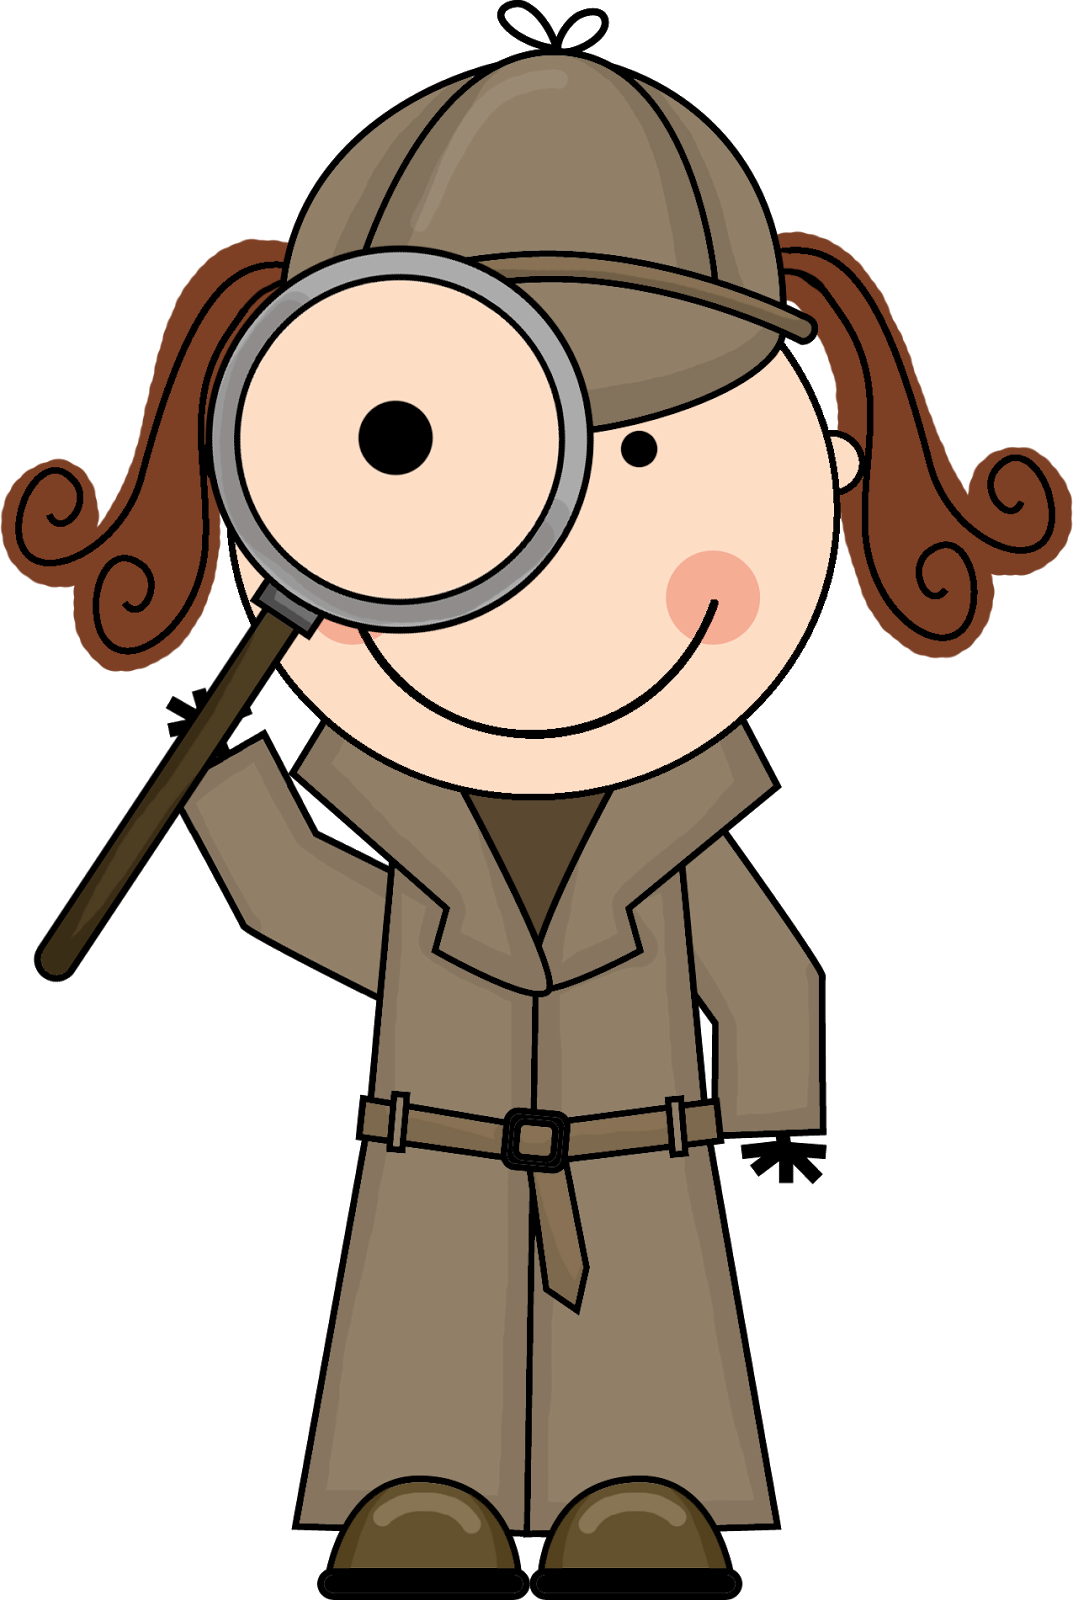 Detective Badge Clip Art | Clipart library - Free Clipart Images